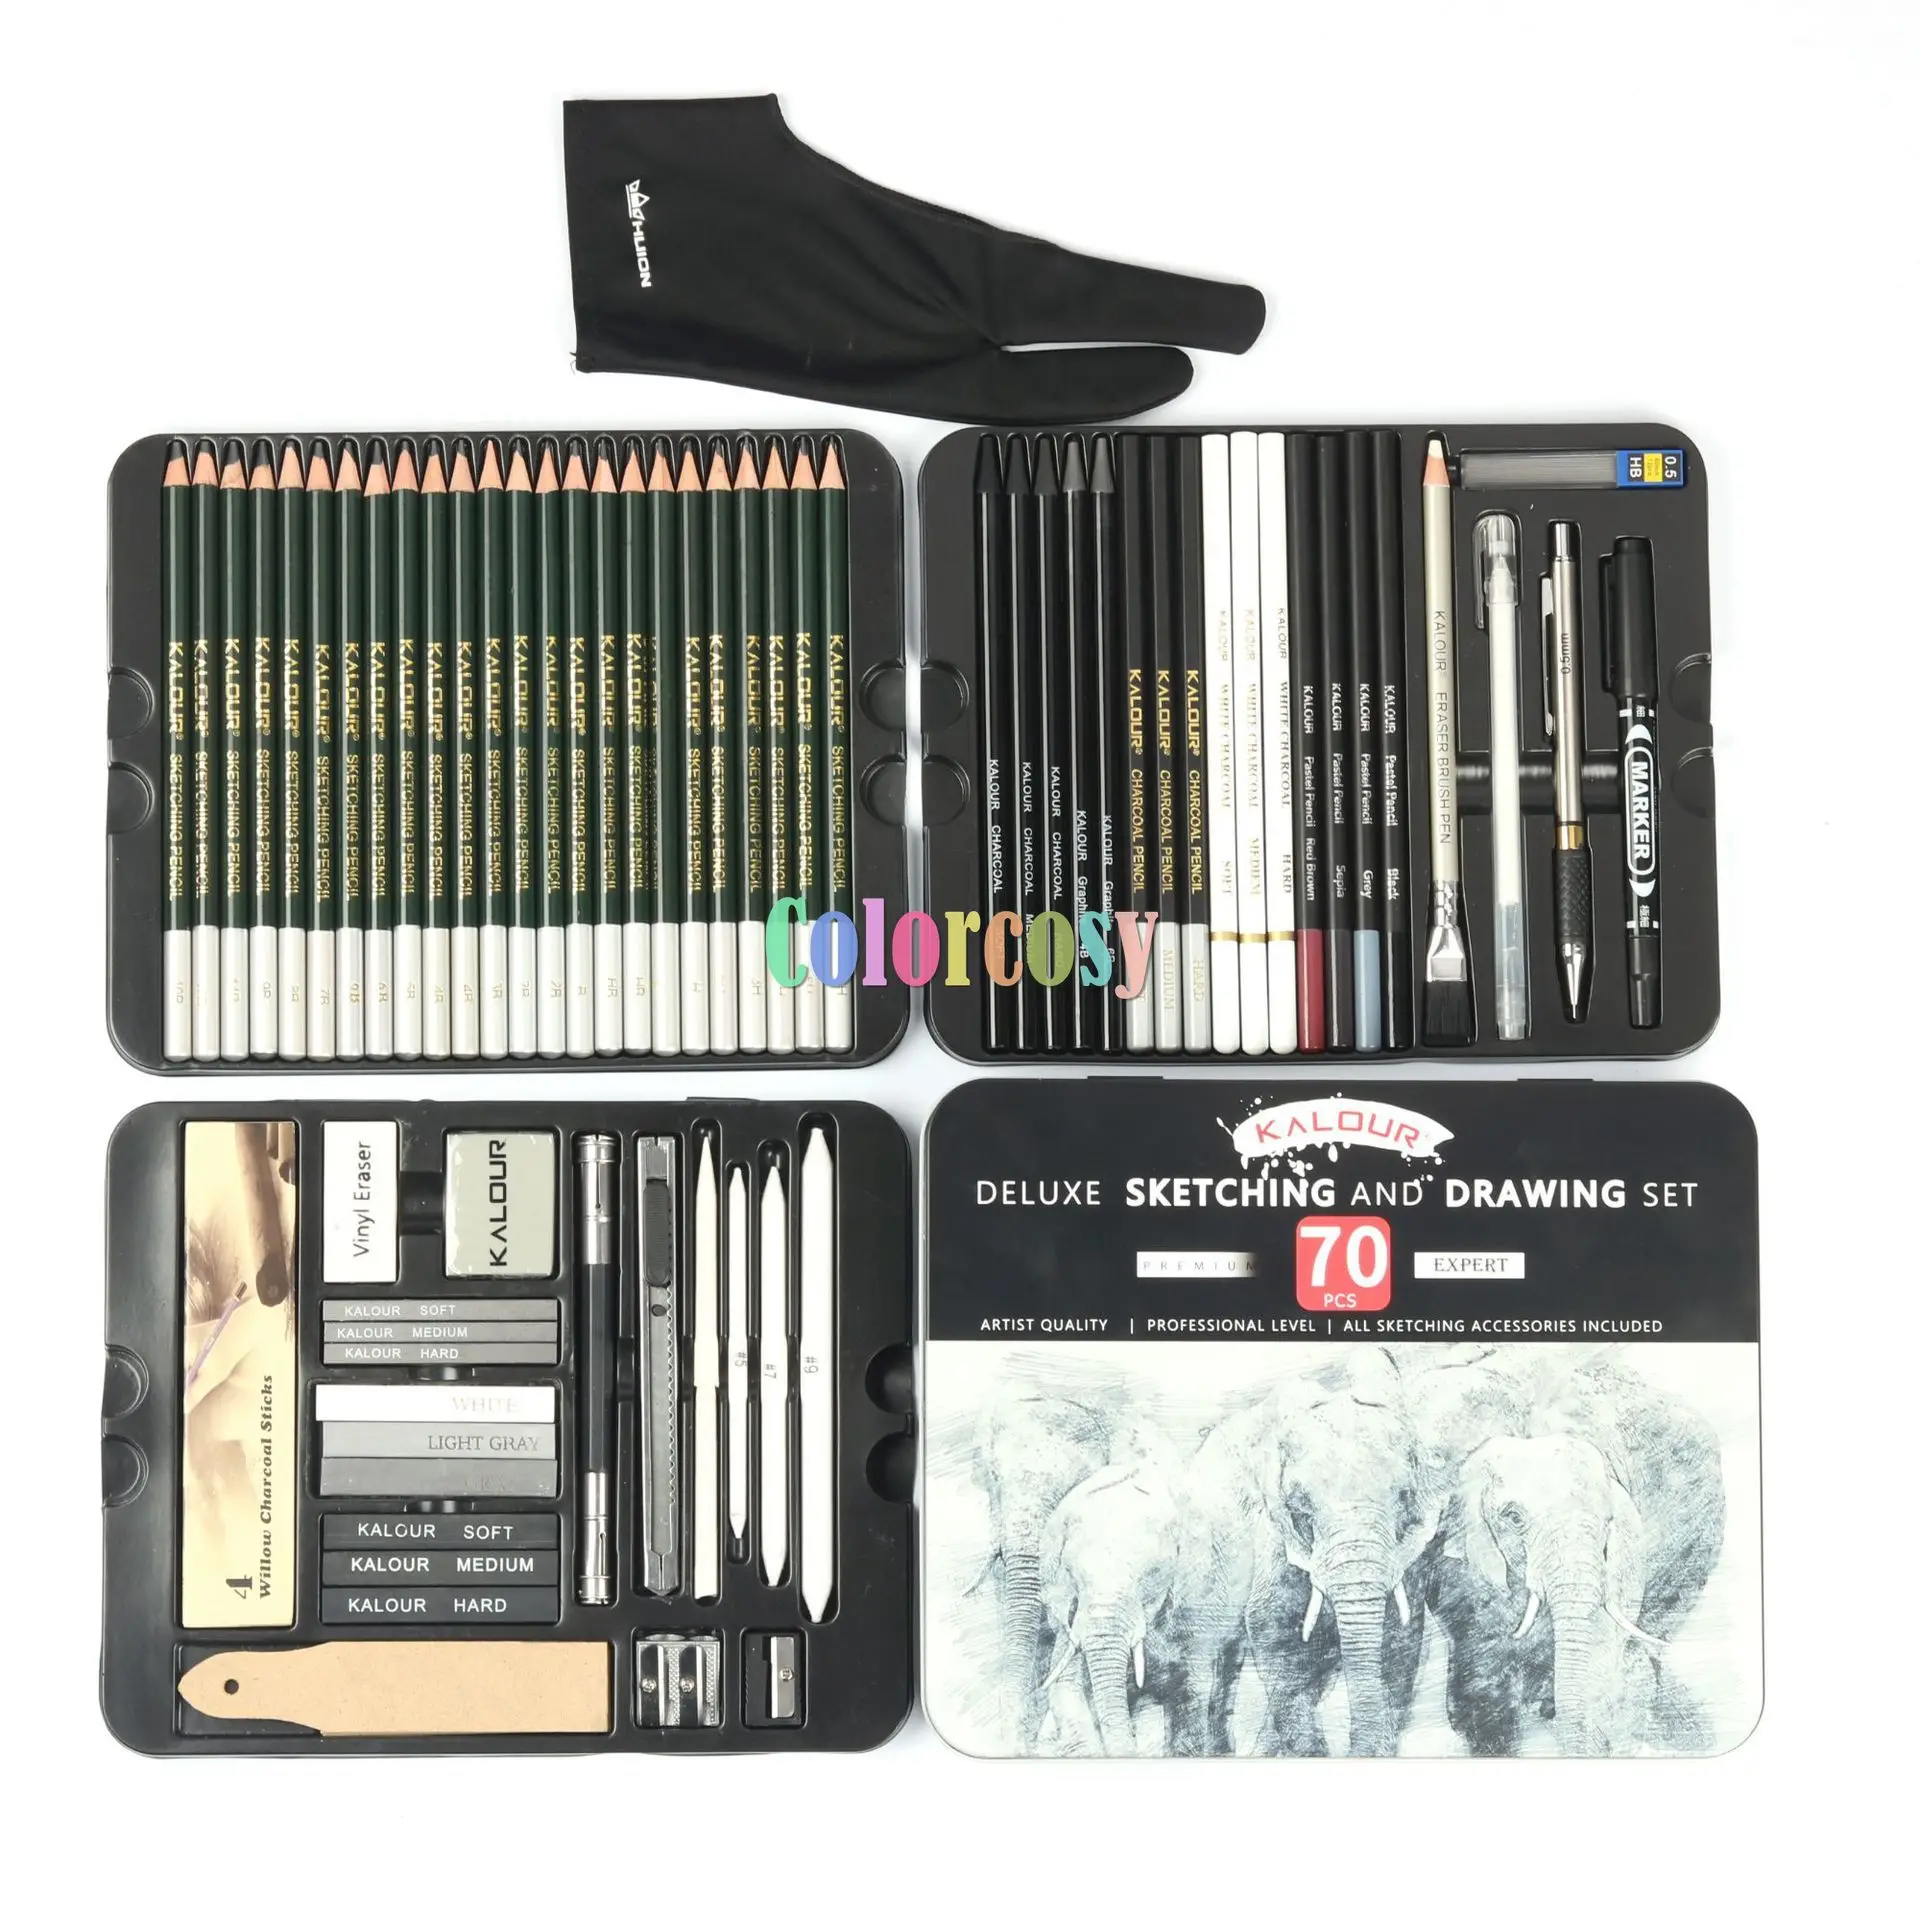 https://ae01.alicdn.com/kf/S6c51bfaa3c324aa58ef6ad42c8ead378d/Kalour-70pcs-Deluxe-Sketching-and-Drawing-Set-Art-Supplies-Graphite-Drawing-Pencils-and-Sketch-Set-Sketching.jpg